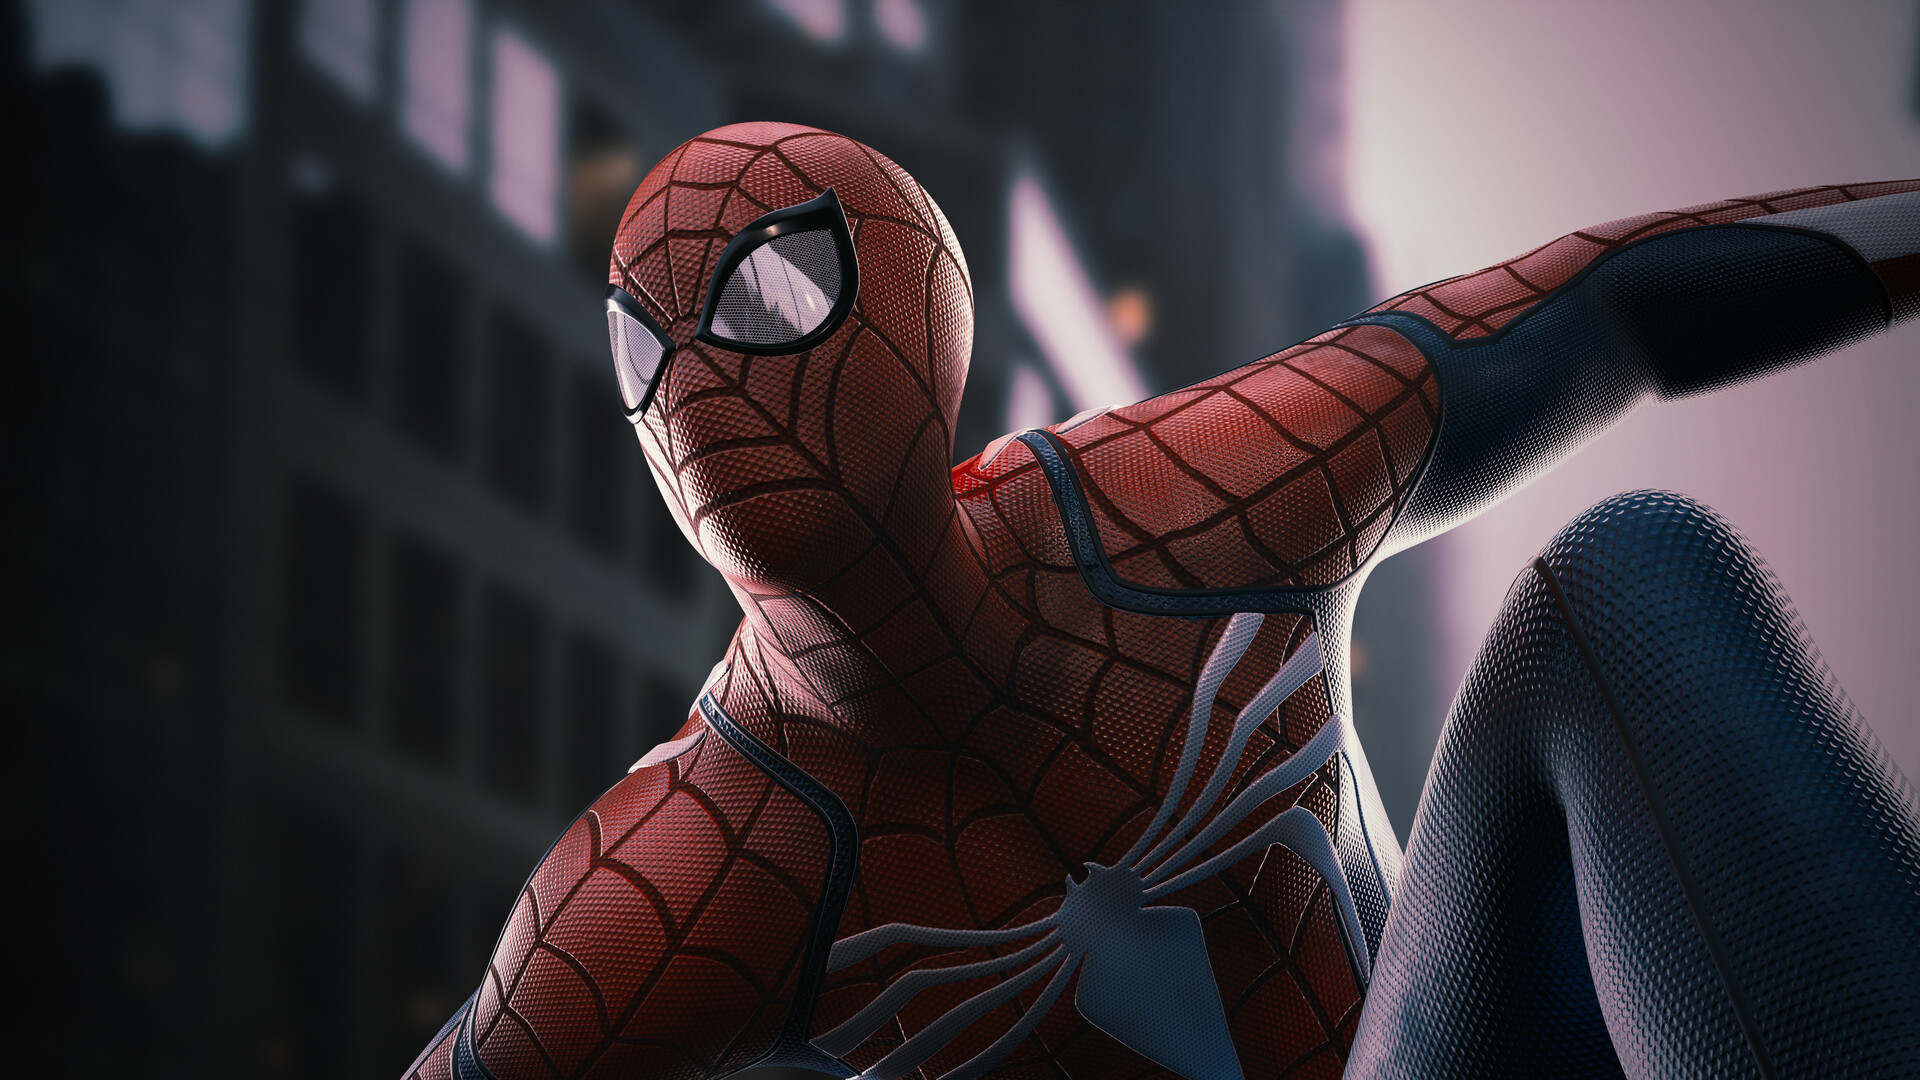 10 Artistic Spider Man Ps 4 Iphone Wallpaper You Must See  Spiderman  Marvel spiderman Spiderman ps4